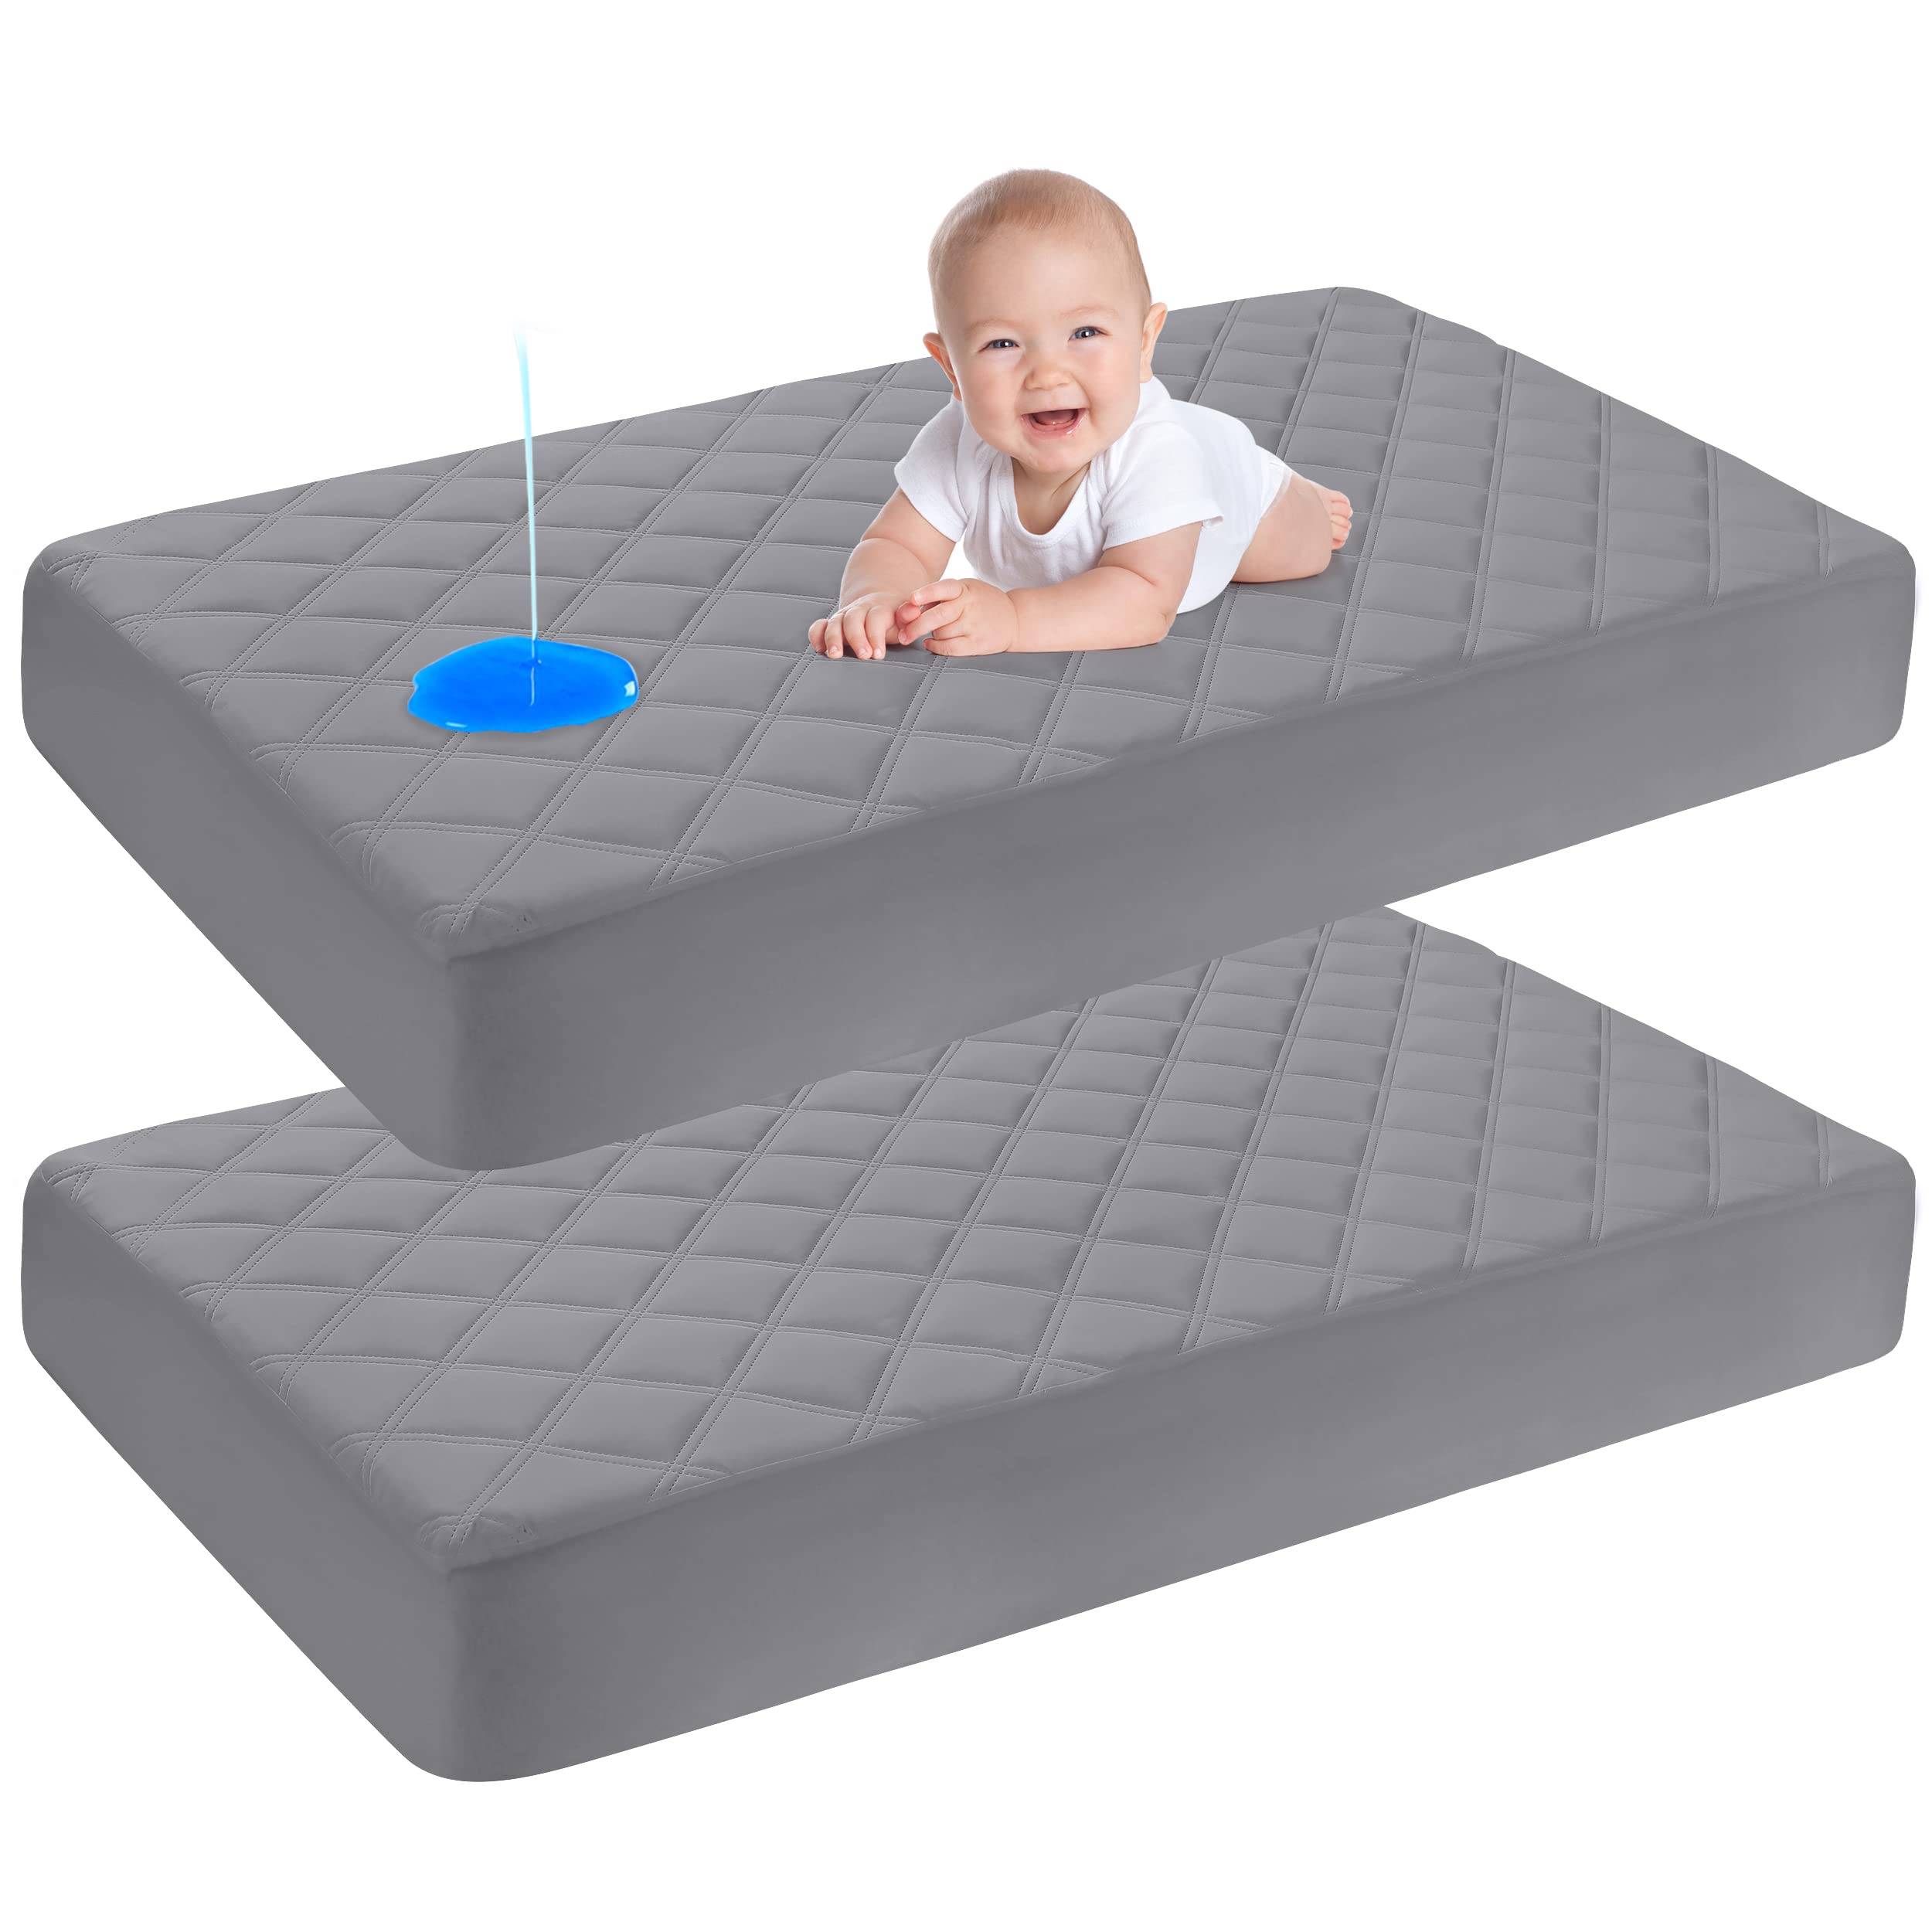 Yoofoss Waterproof Crib Mattress Protector 2 Pack, Quilted Crib Mattress Pad Cover Ultra Soft and Breathable, Machine Washable Toddler Mattress